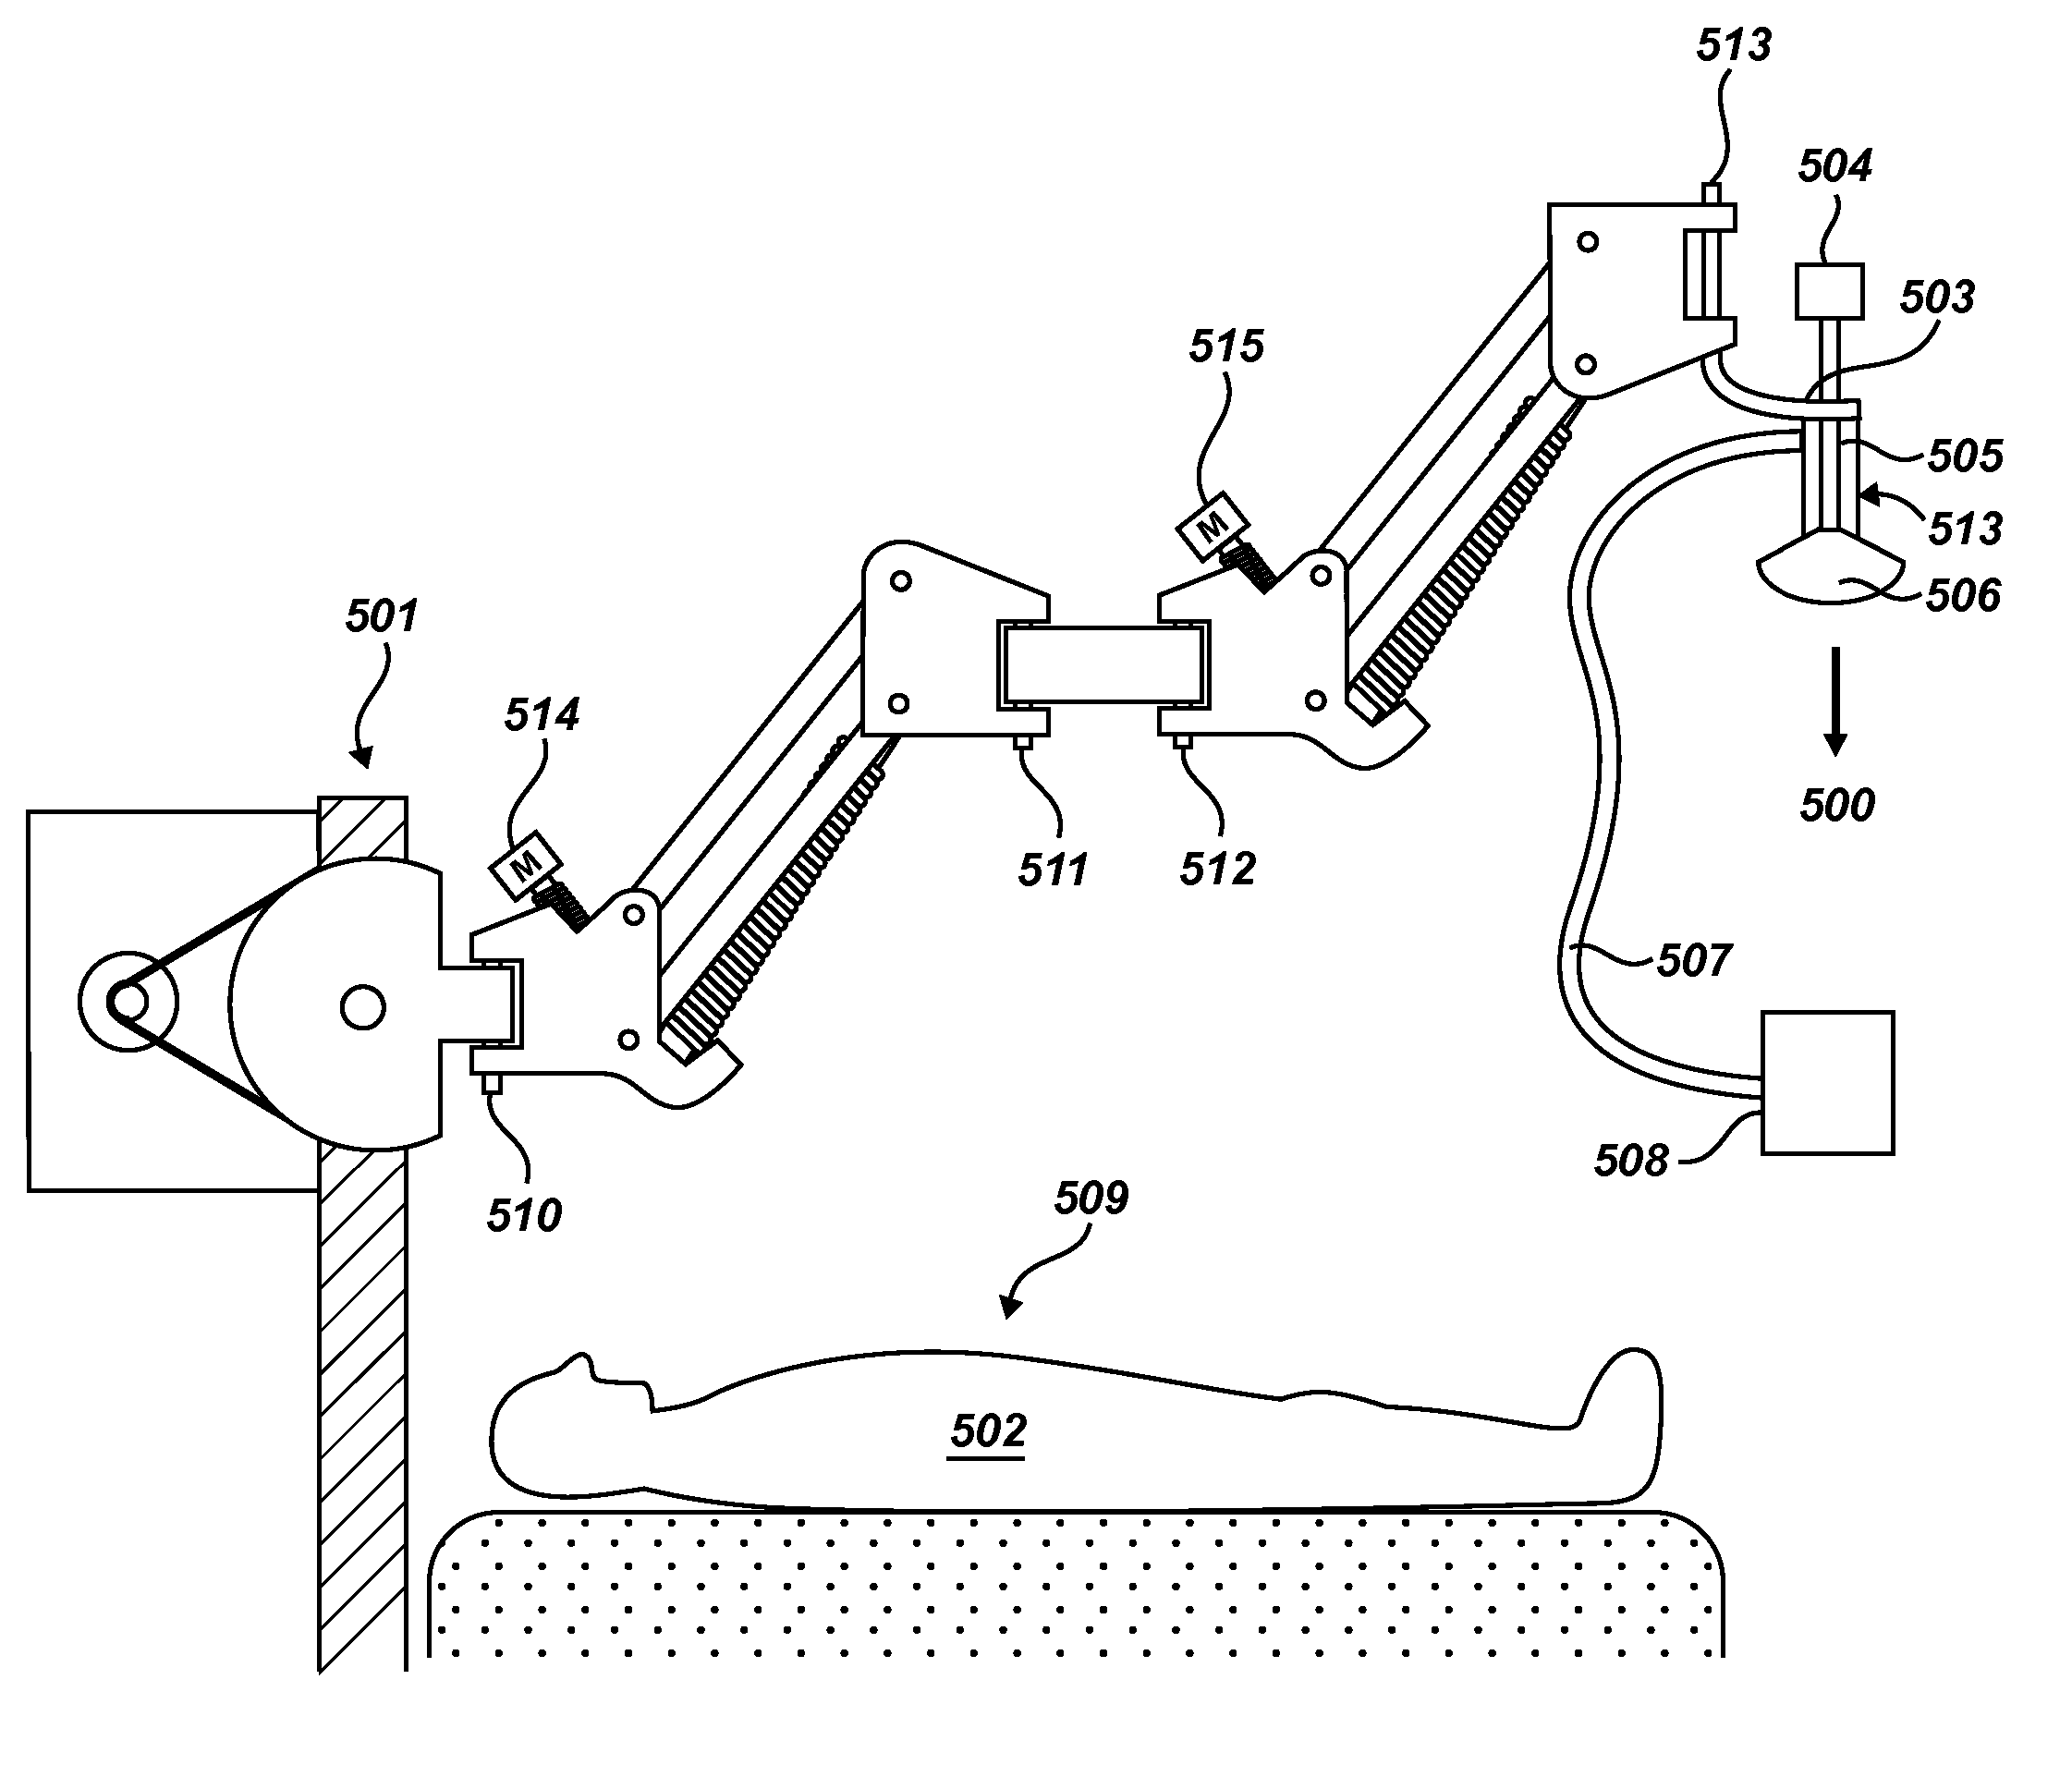 Apparatus for hand control, pressure amplification, and stabilization of medical and industrial devices